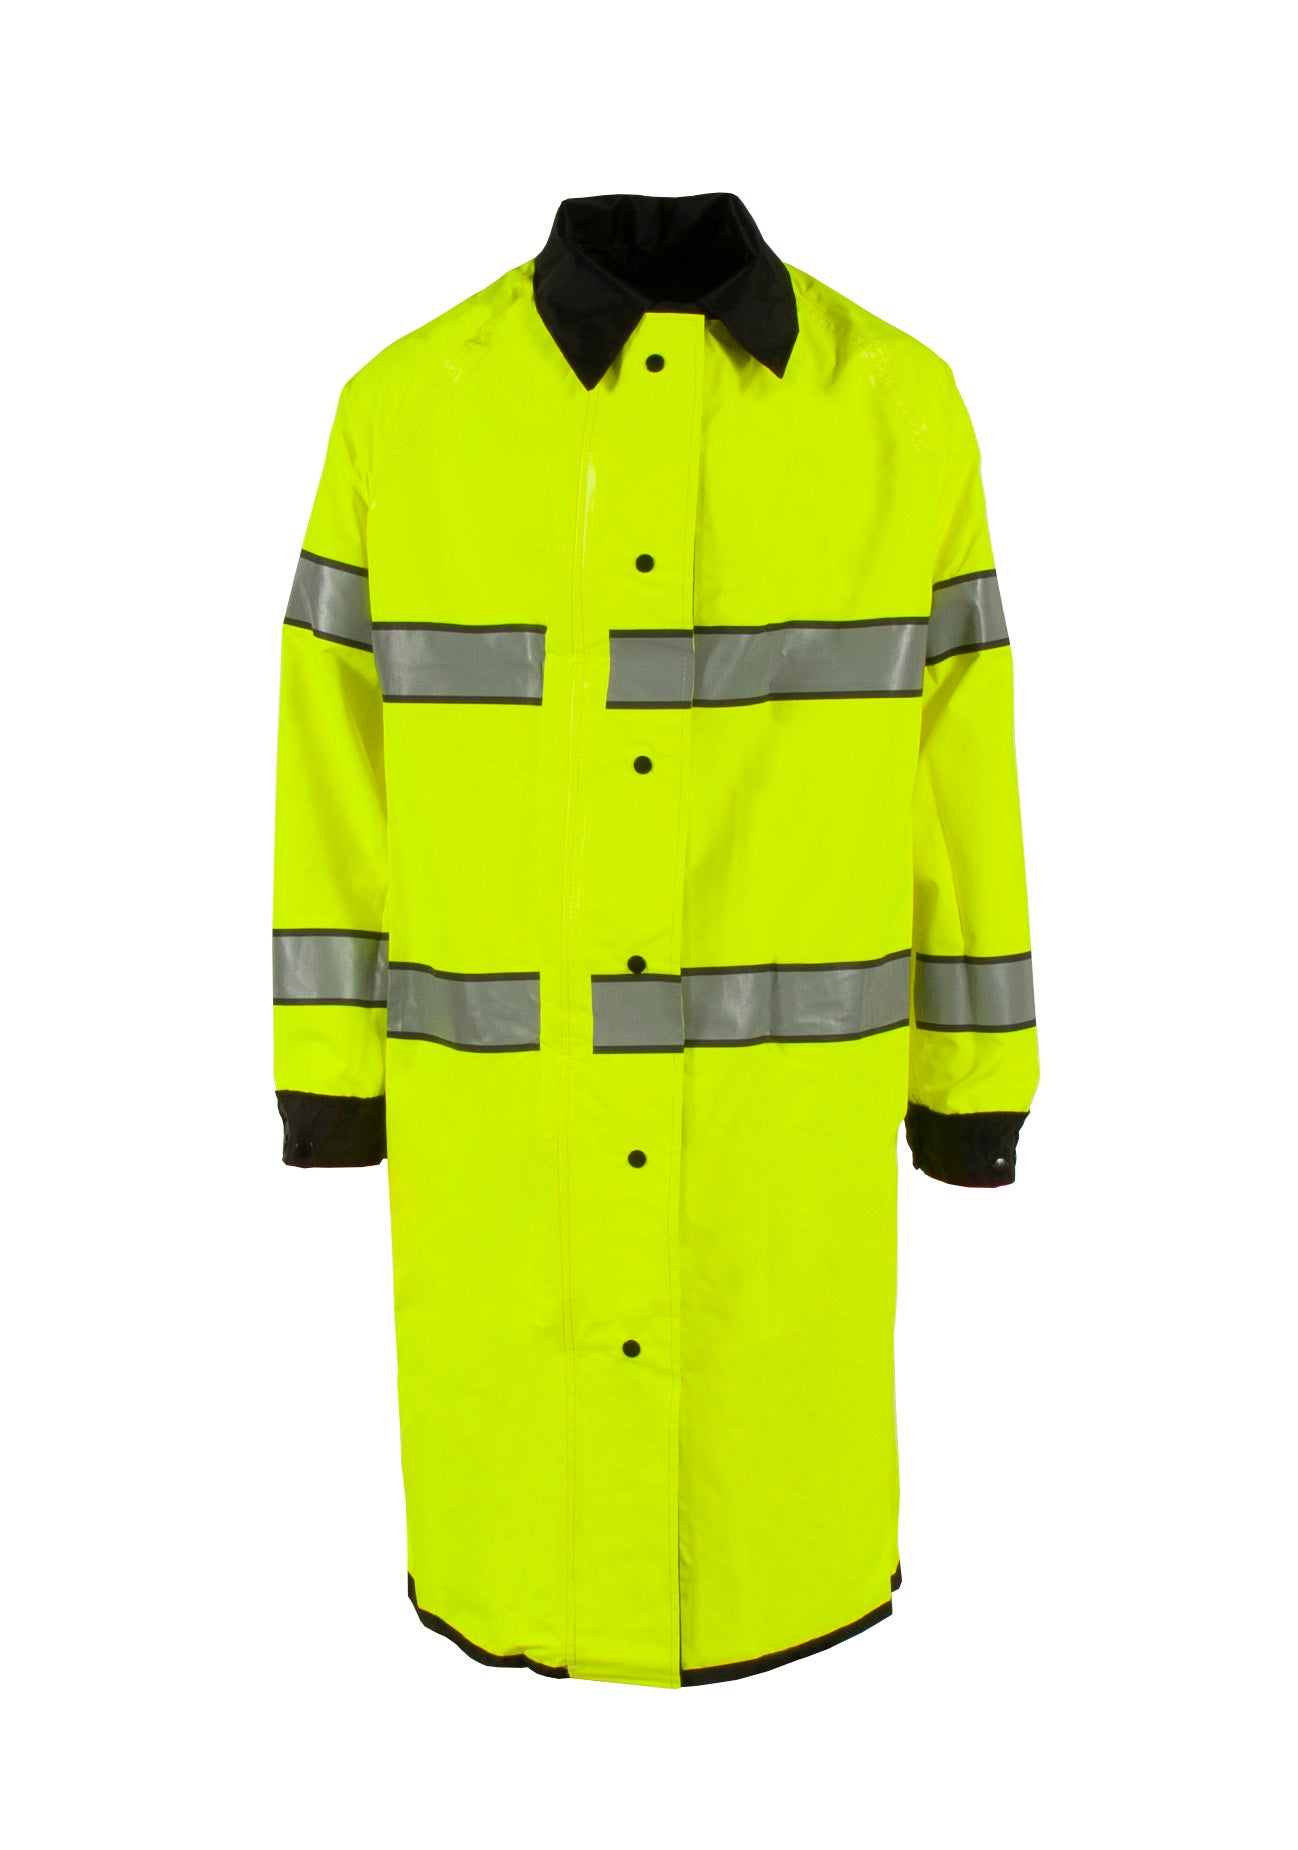 Neese 4703RCH3M Safe Officer Series Reversible Raincoat with Reflective Taping-eSafety Supplies, Inc